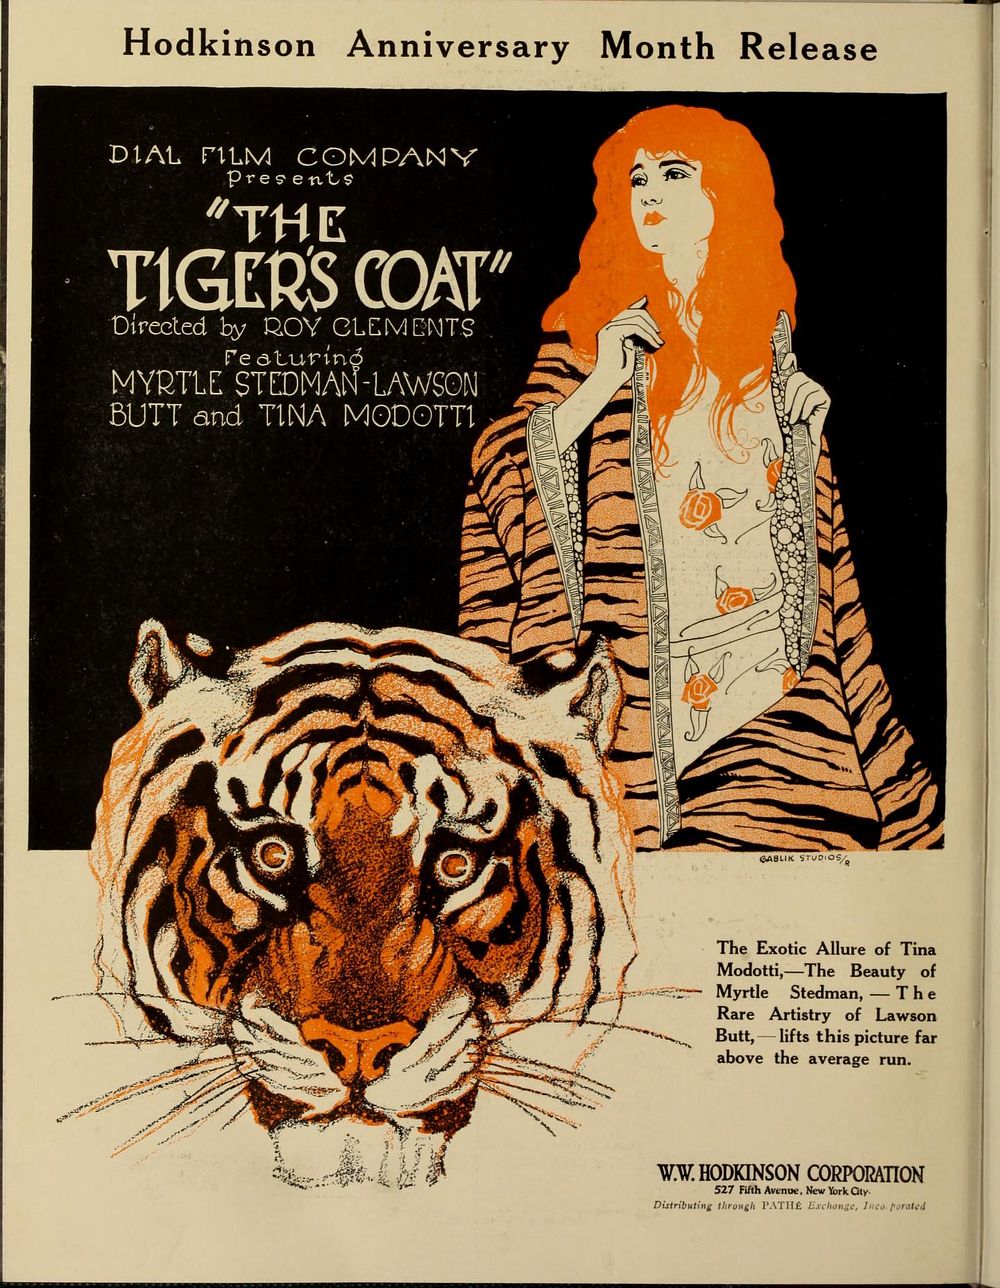 Ad for The Tiger's Coat"